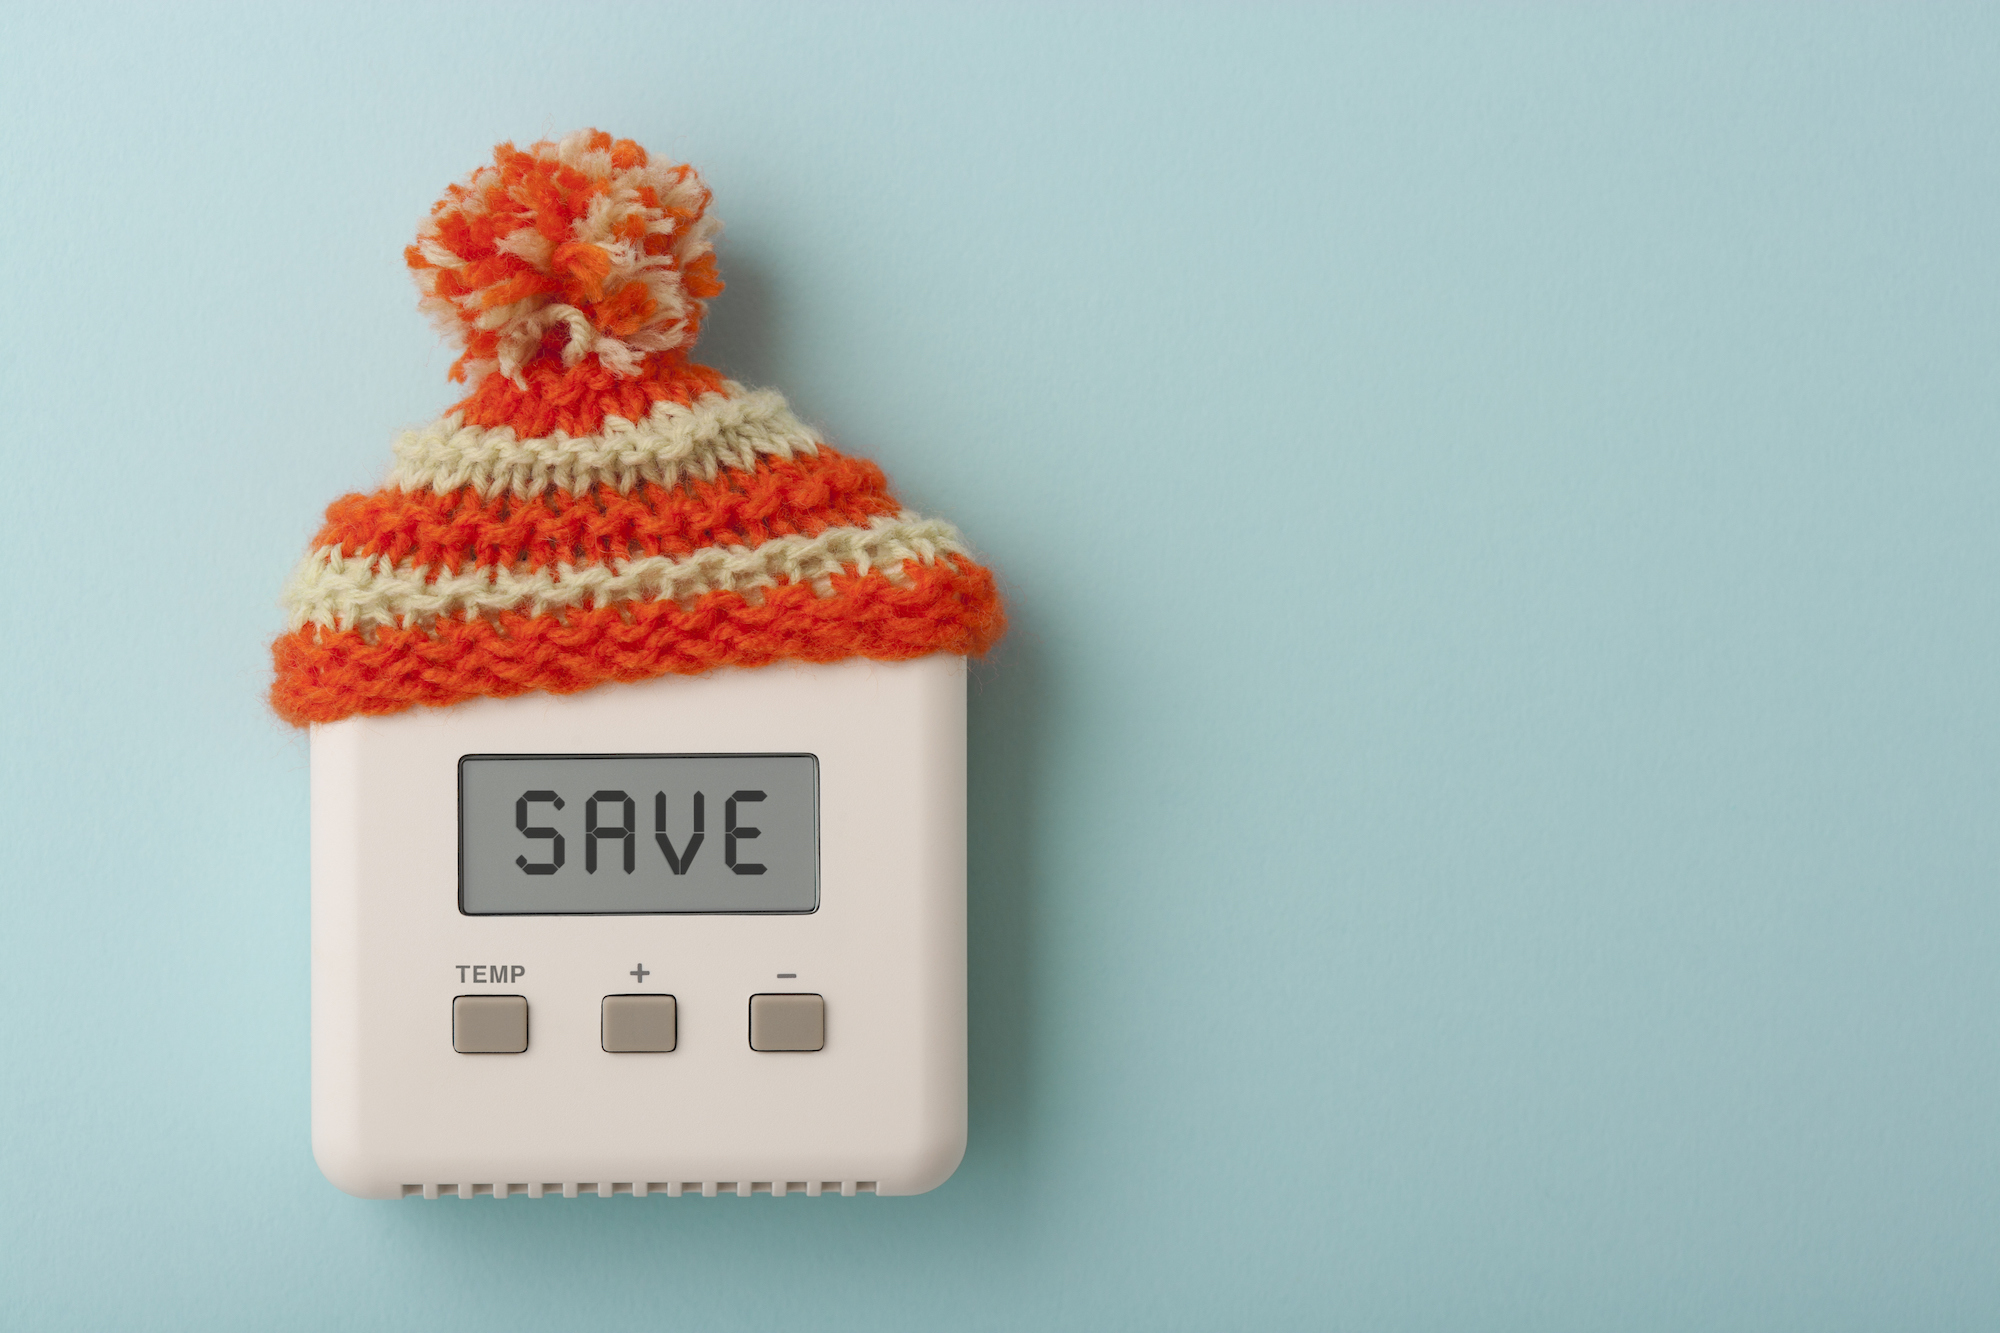 A thermostat with a wooly hat on. The screen on the thermostat reads "SAVE"